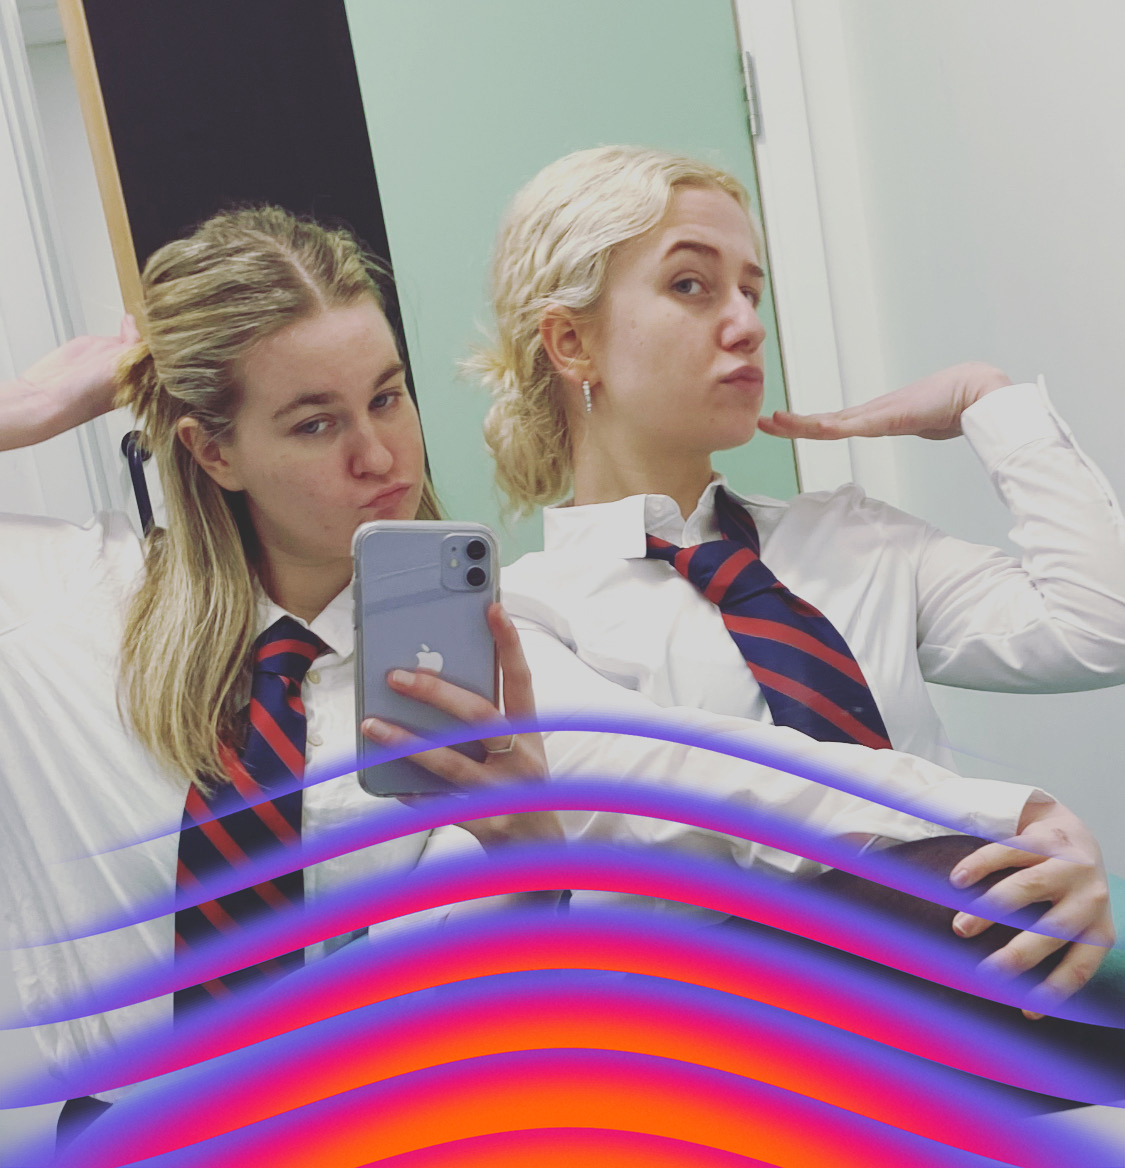 Abbie and fellow student pose in school uniform costume